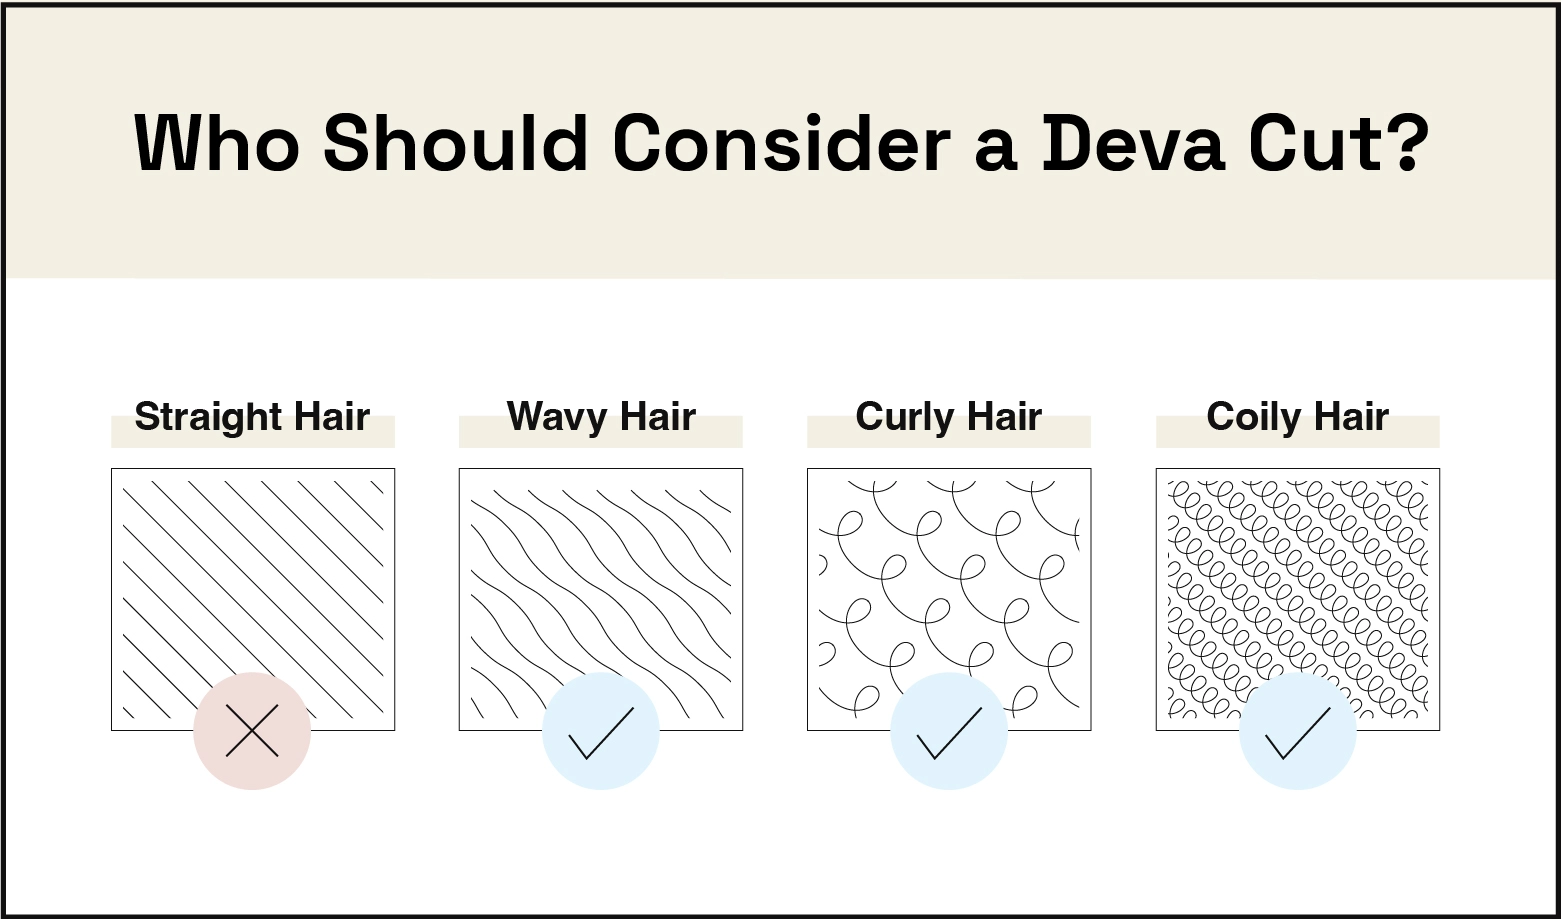 Deva cuts don’t suit straight hair but can work for wavy, curly, and coily hair textures.